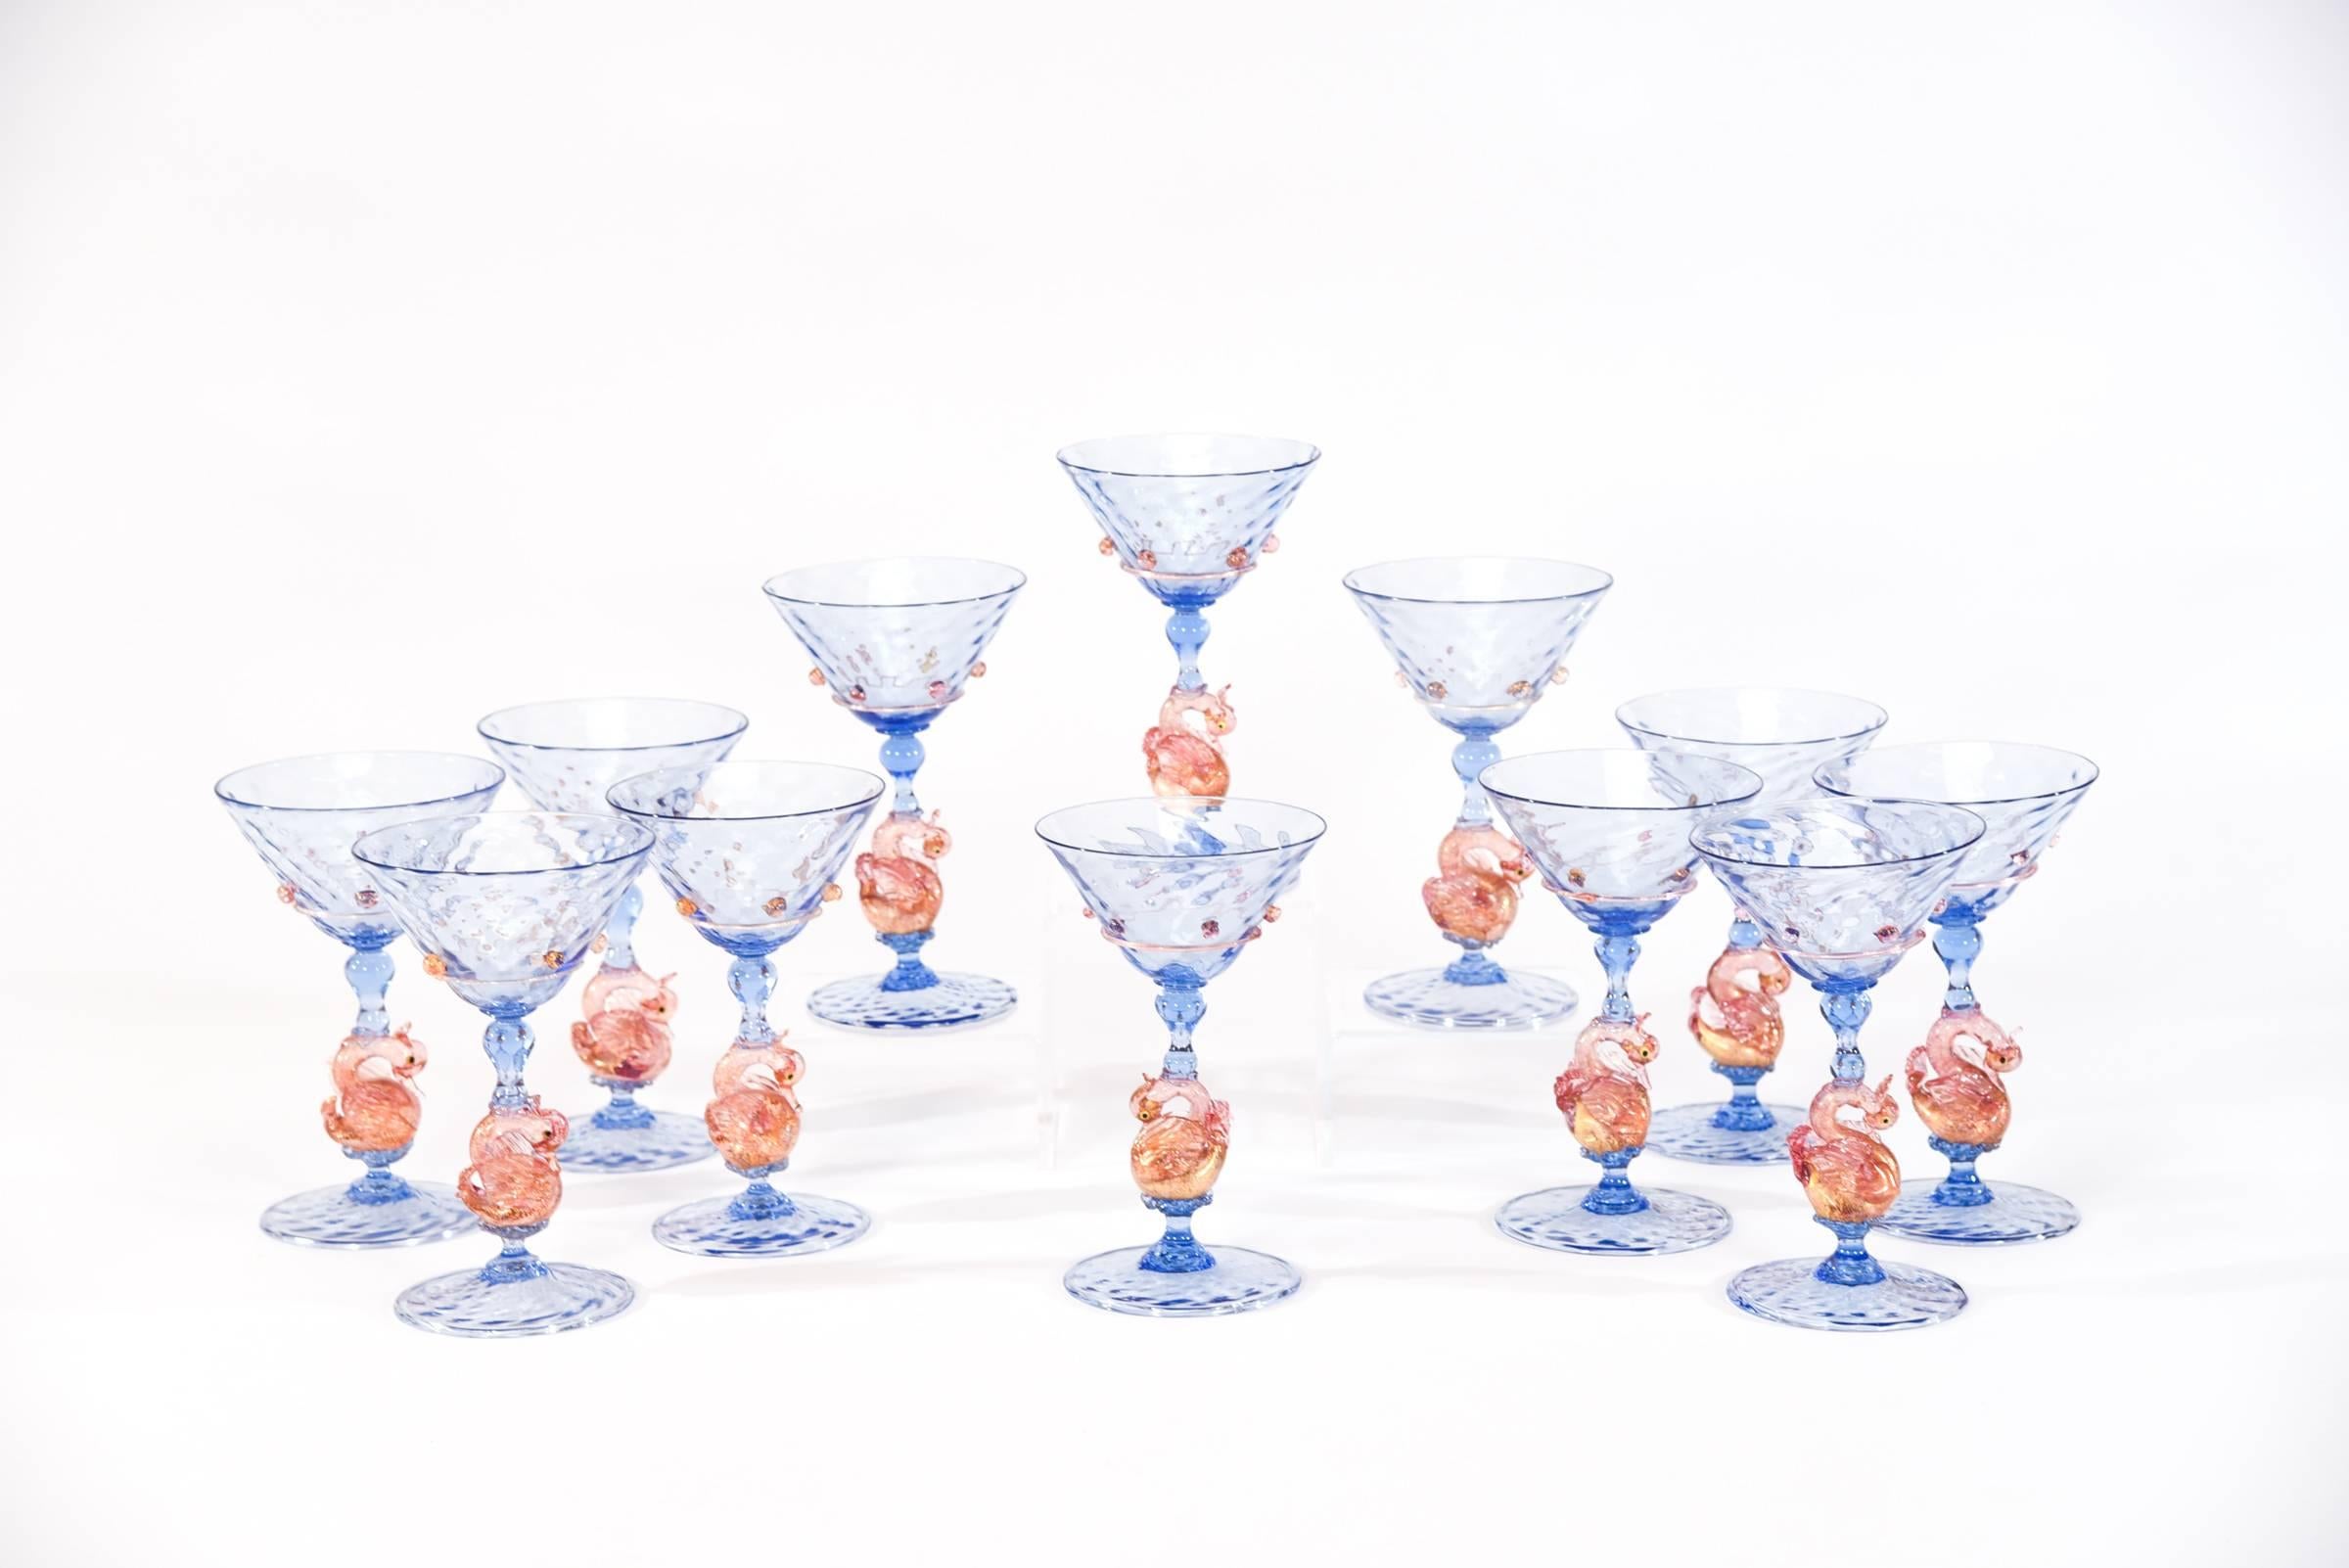 What an amazing Venetian Murano stemware service, ready for your next event in the bright and Classic French blue. Each piece is handblown in an optic rib pattern with applied pink prunts and figural swan connectors. All the sizes are practical and